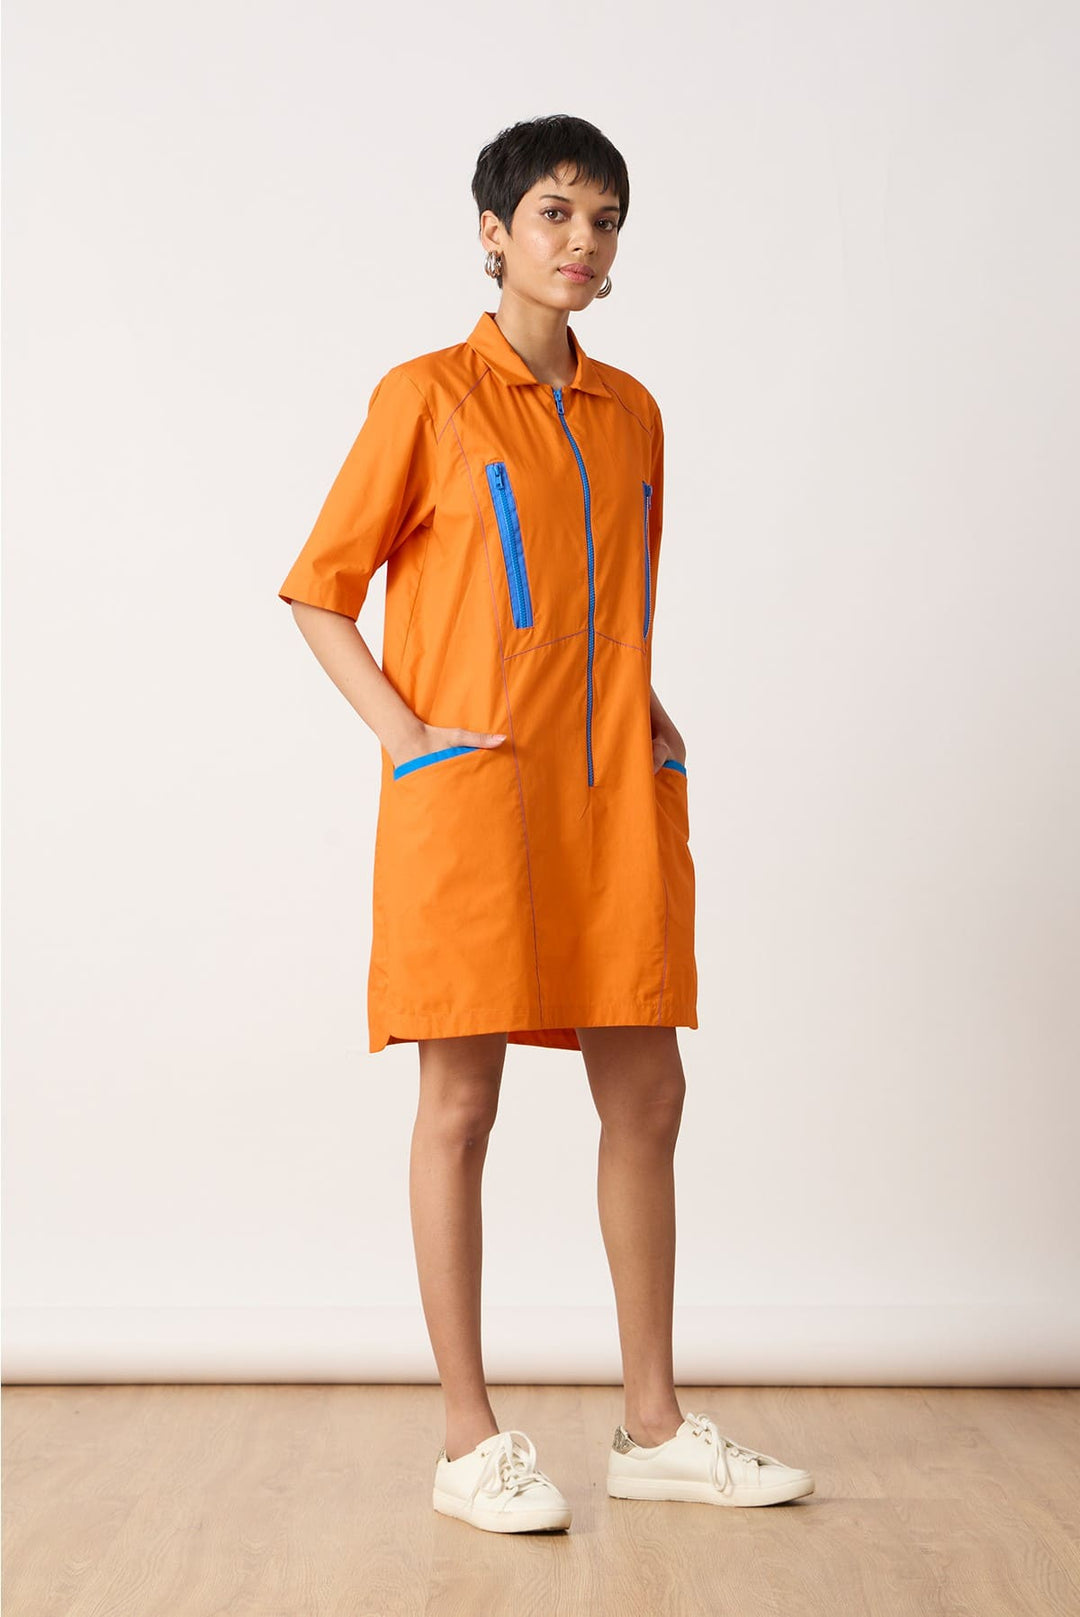 Dawson Dress A chic, a-line dress with contrast zippers,